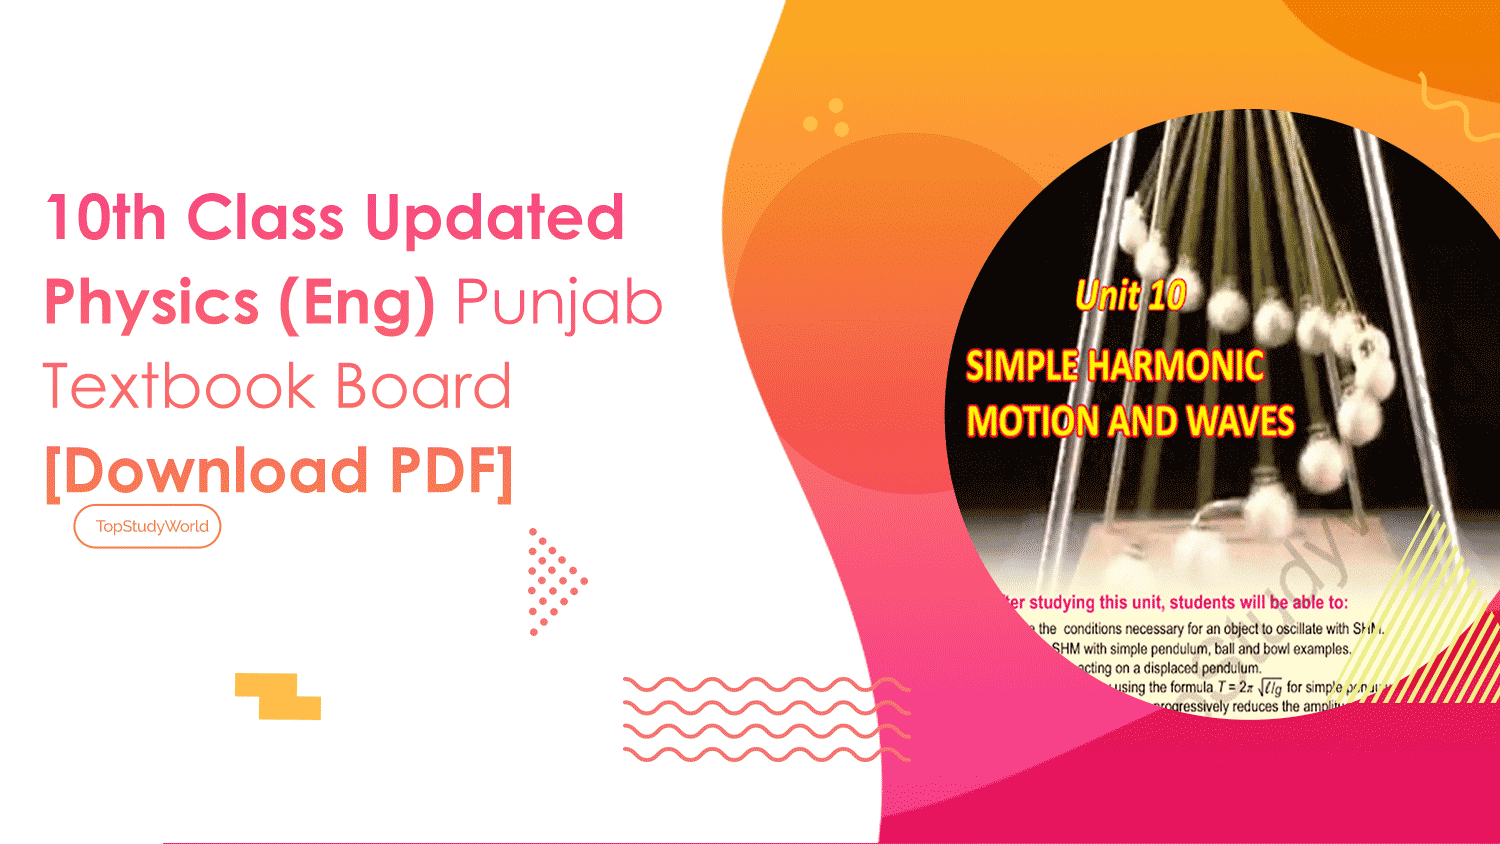 10th Class Updated Physics (Eng) Punjab Textbook Board [Download PDF]